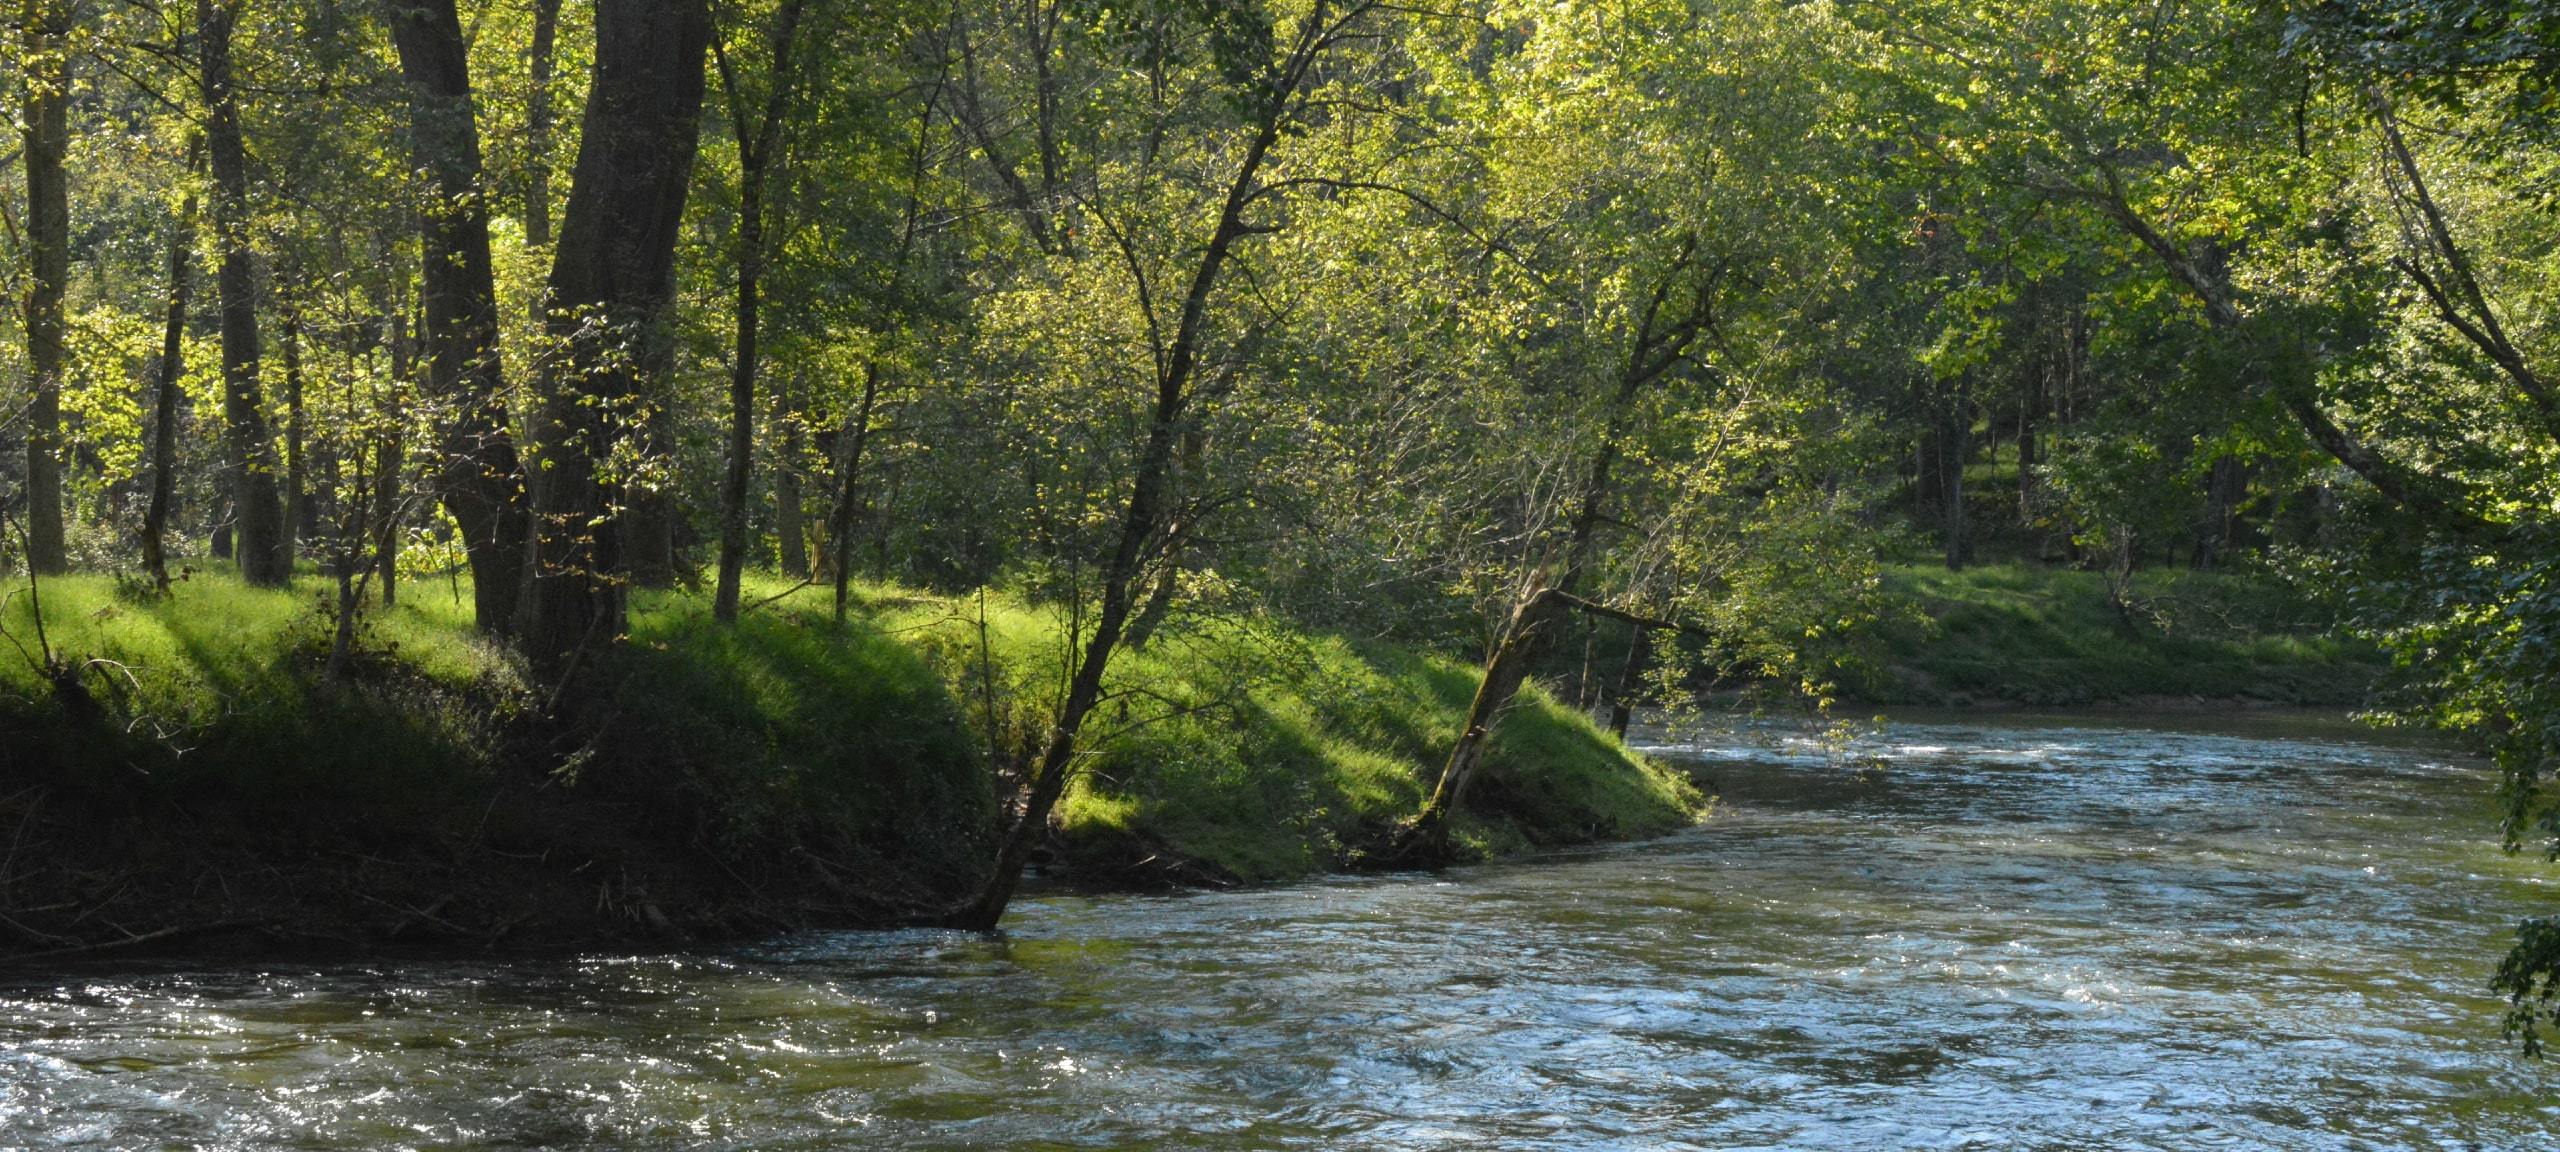 Patapsco River bank with sunny trees in Hanover, Maryland